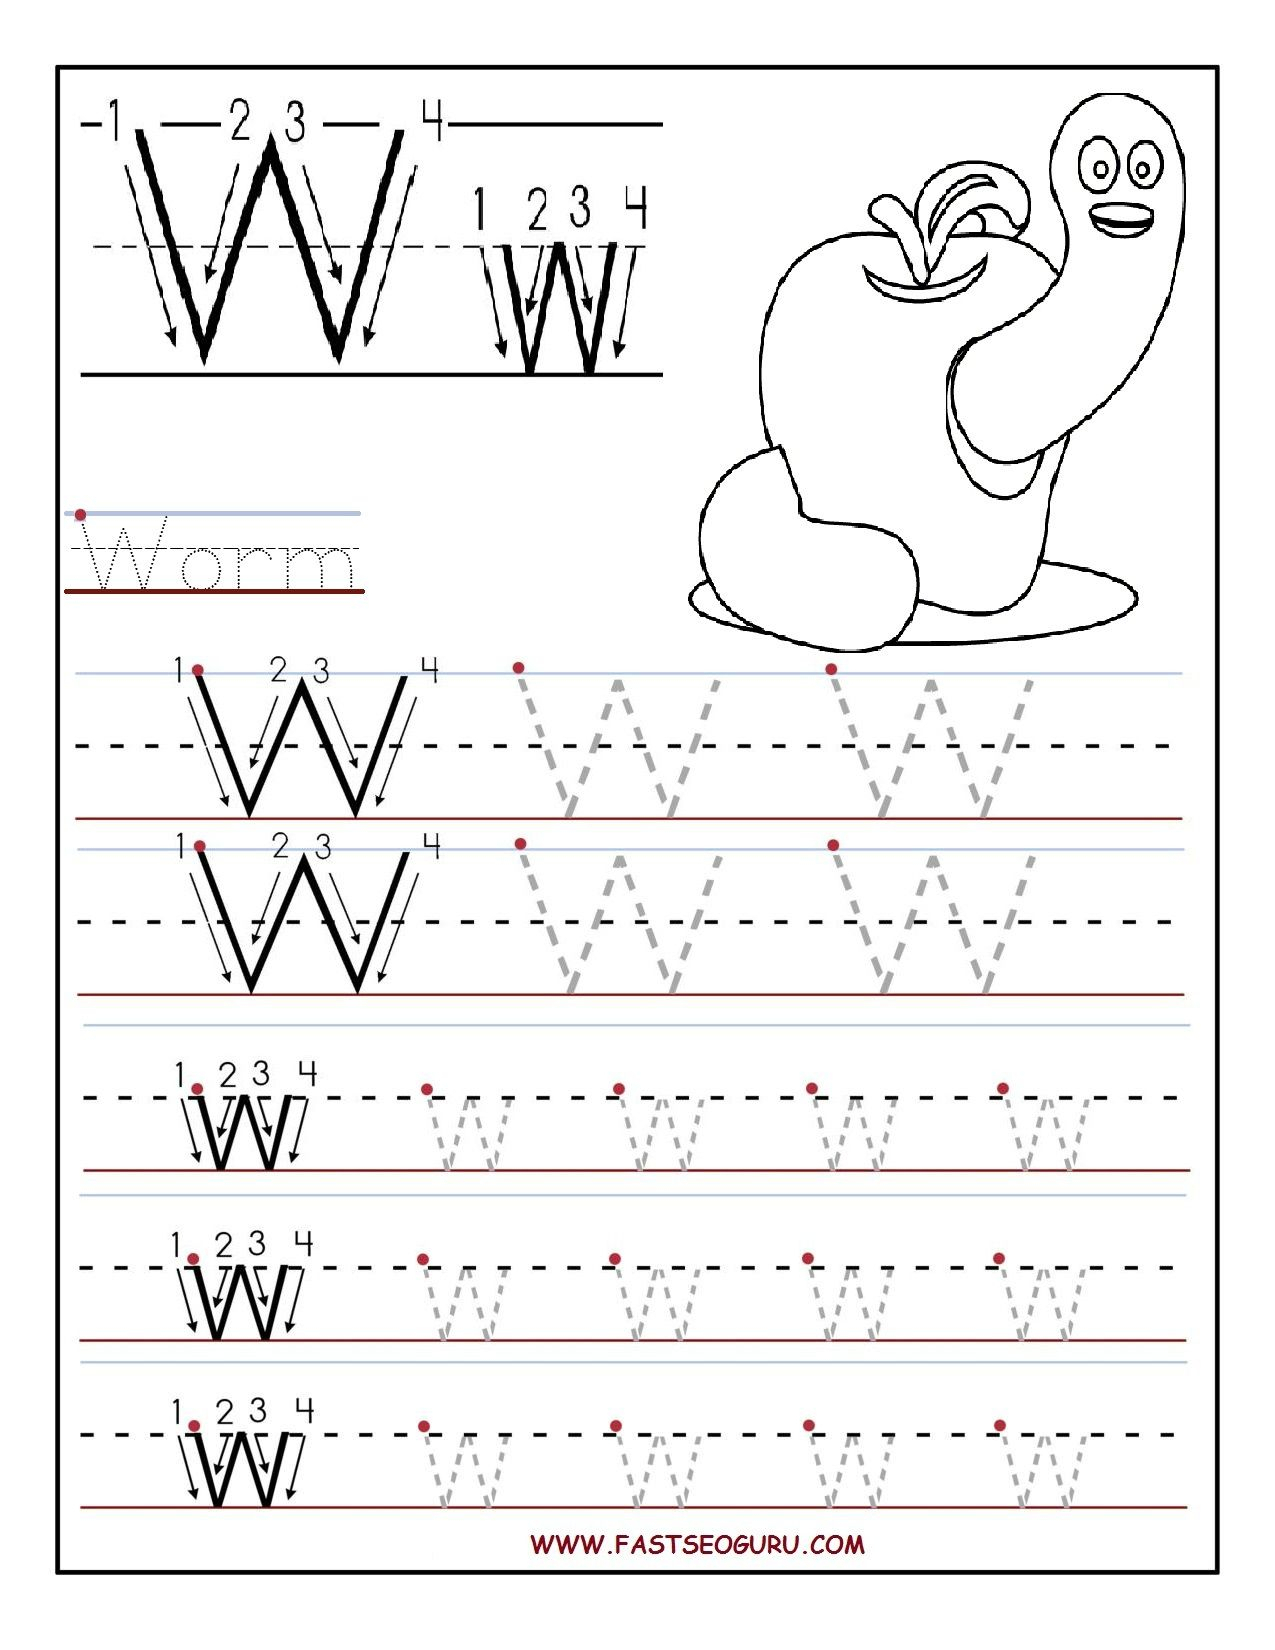 Printable Letter W Tracing Worksheets For Preschool for Letter W Tracing Page